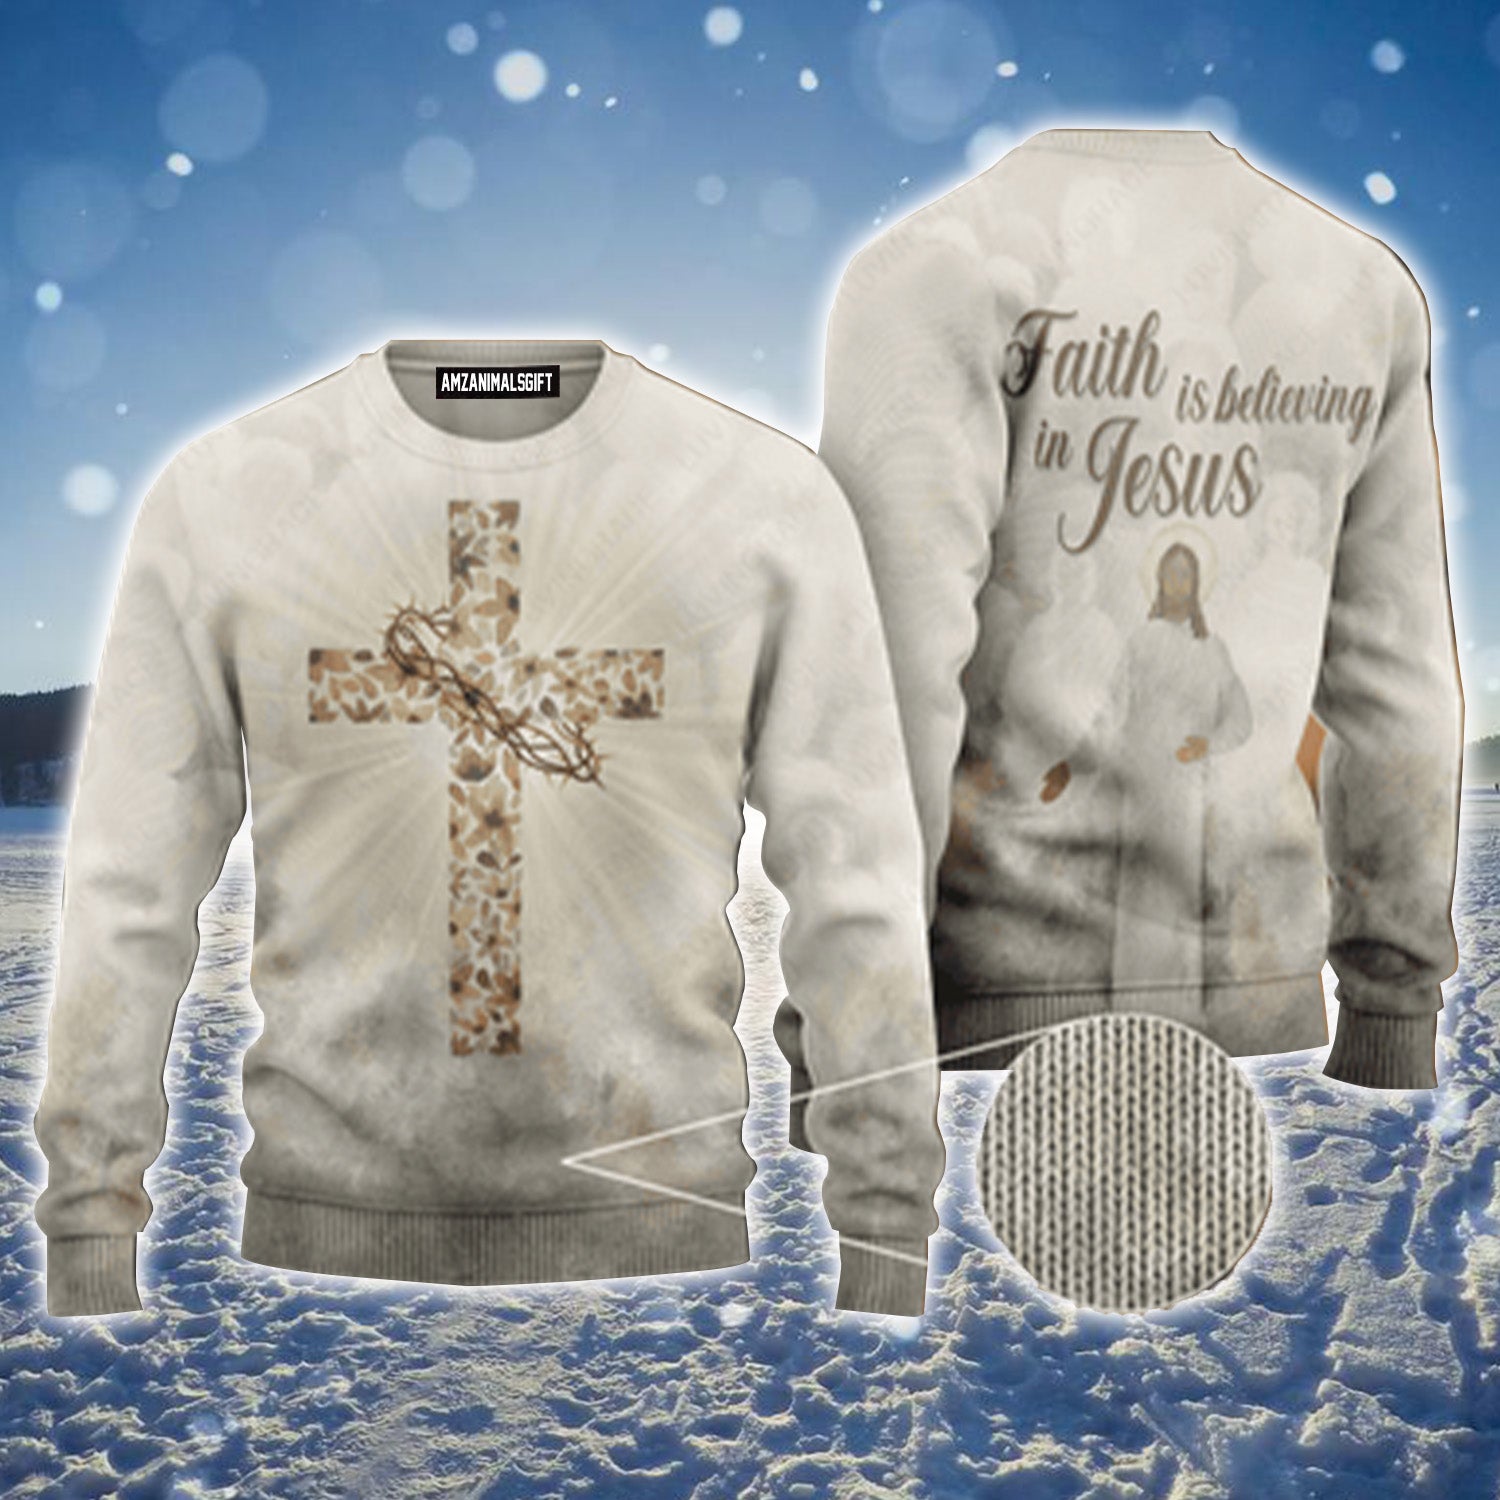 Flower Cross Crown Of Jesus Christ Urly Sweater, Christmas Sweater For Men & Women - Perfect Gift For New Year, Winter, Christmas